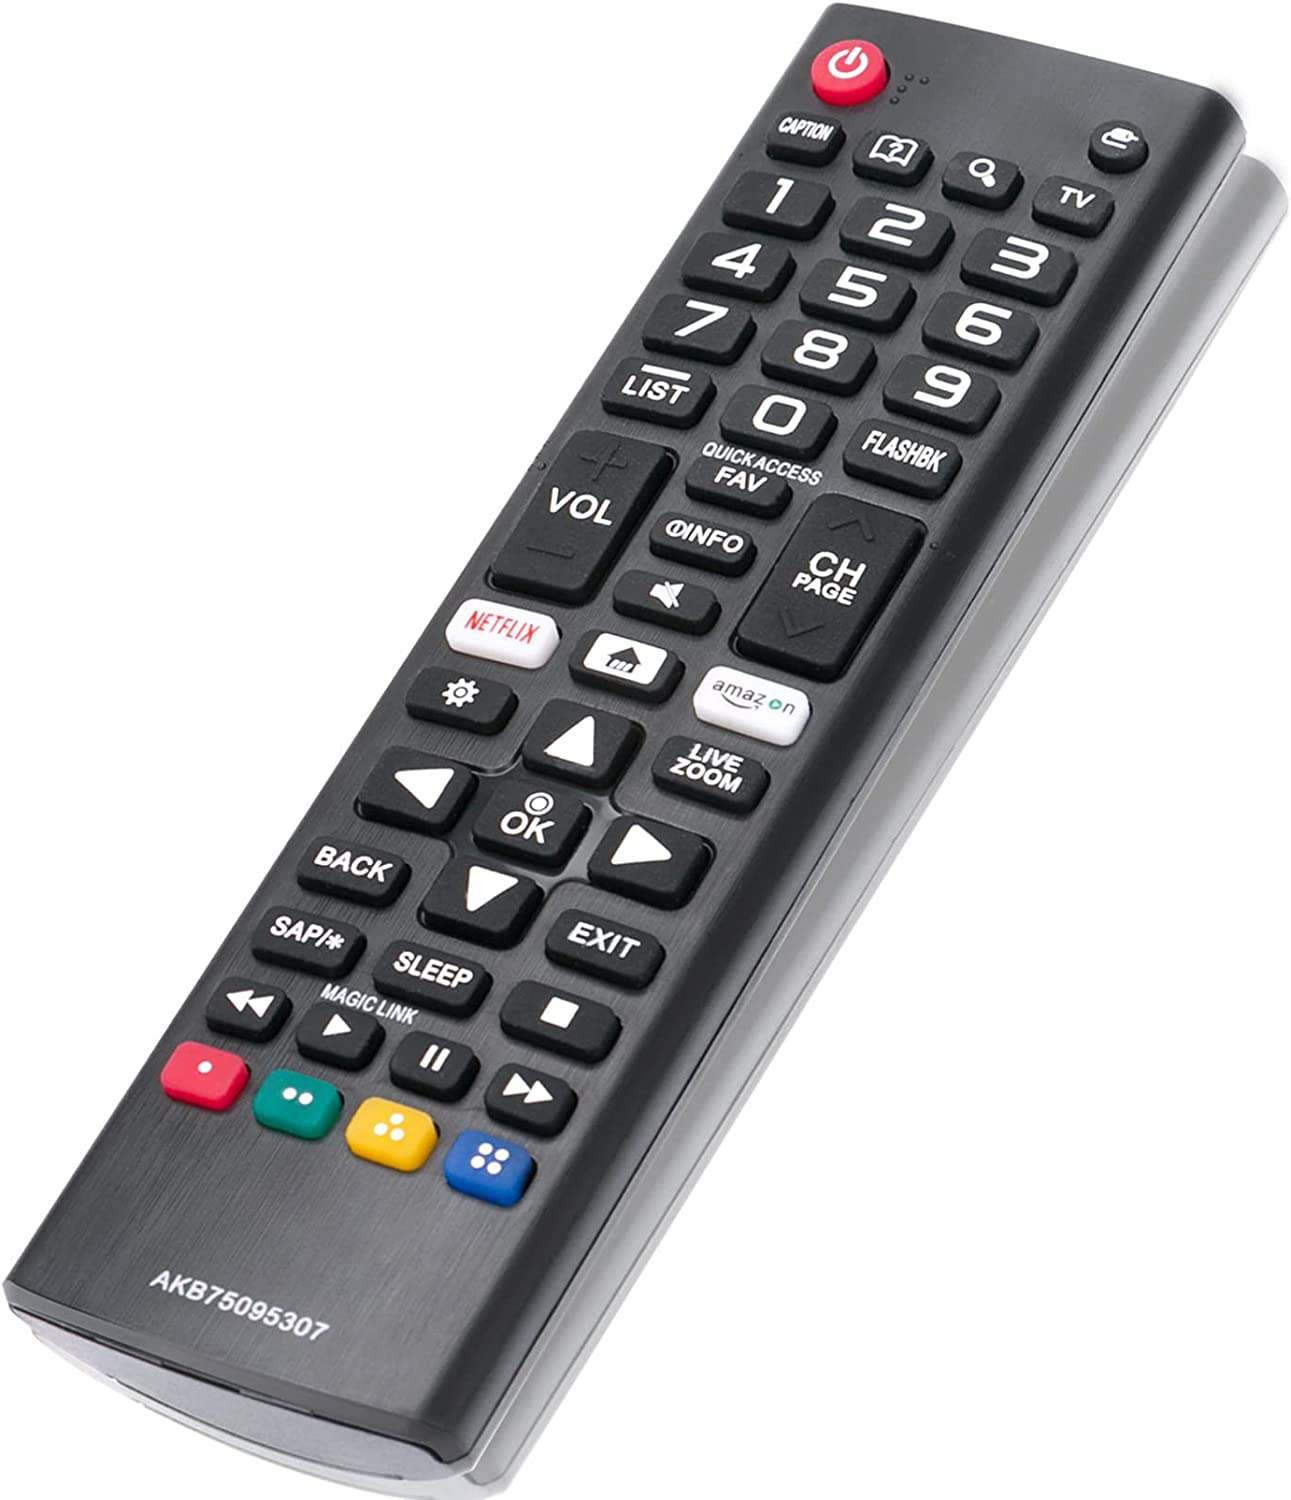 AKB75095307 Remote Control Replacement Fit for LG LED LCD TV 43UJ6500 43UJ6560 49UJ6500 49UJ6560 55UJ6520 55UJ6540 55UJ6580 60UJ6540 24Lm520D 24LM520S 28Lm520S